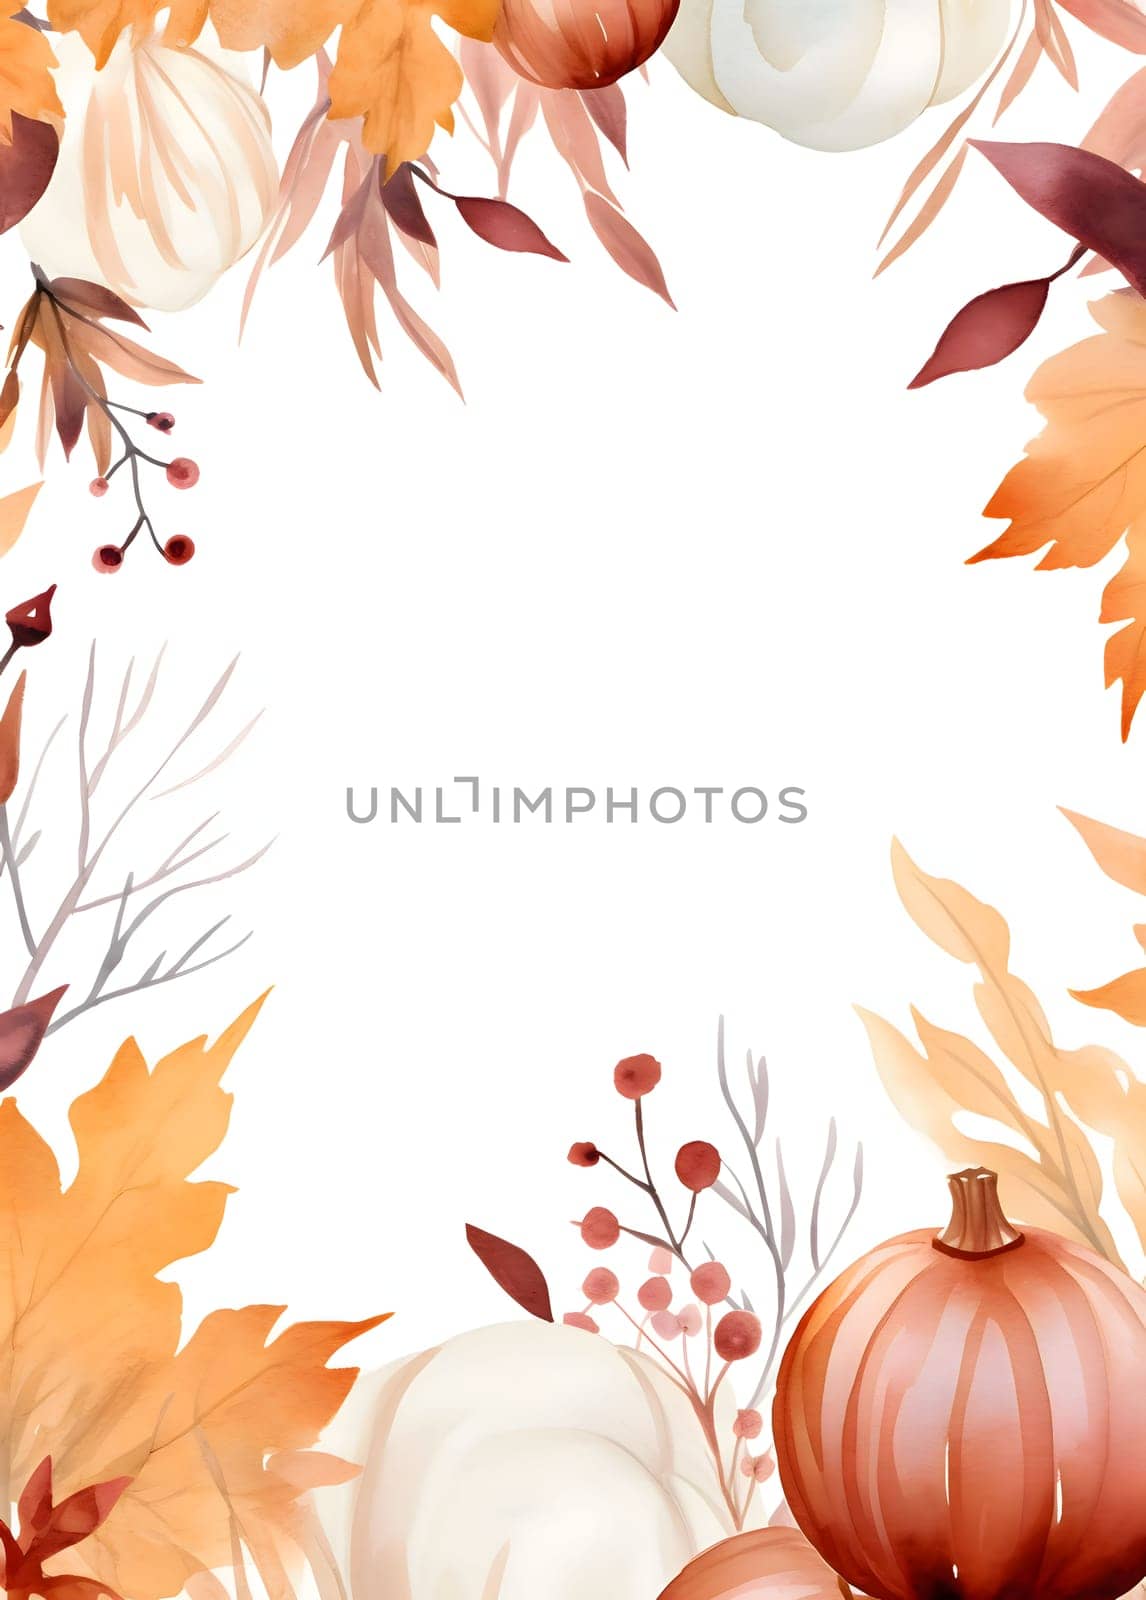 Mother and child around turkey, pumpkins and autumn leaves. Pumpkin as a dish of thanksgiving for the harvest, picture on a white isolated background. by ThemesS